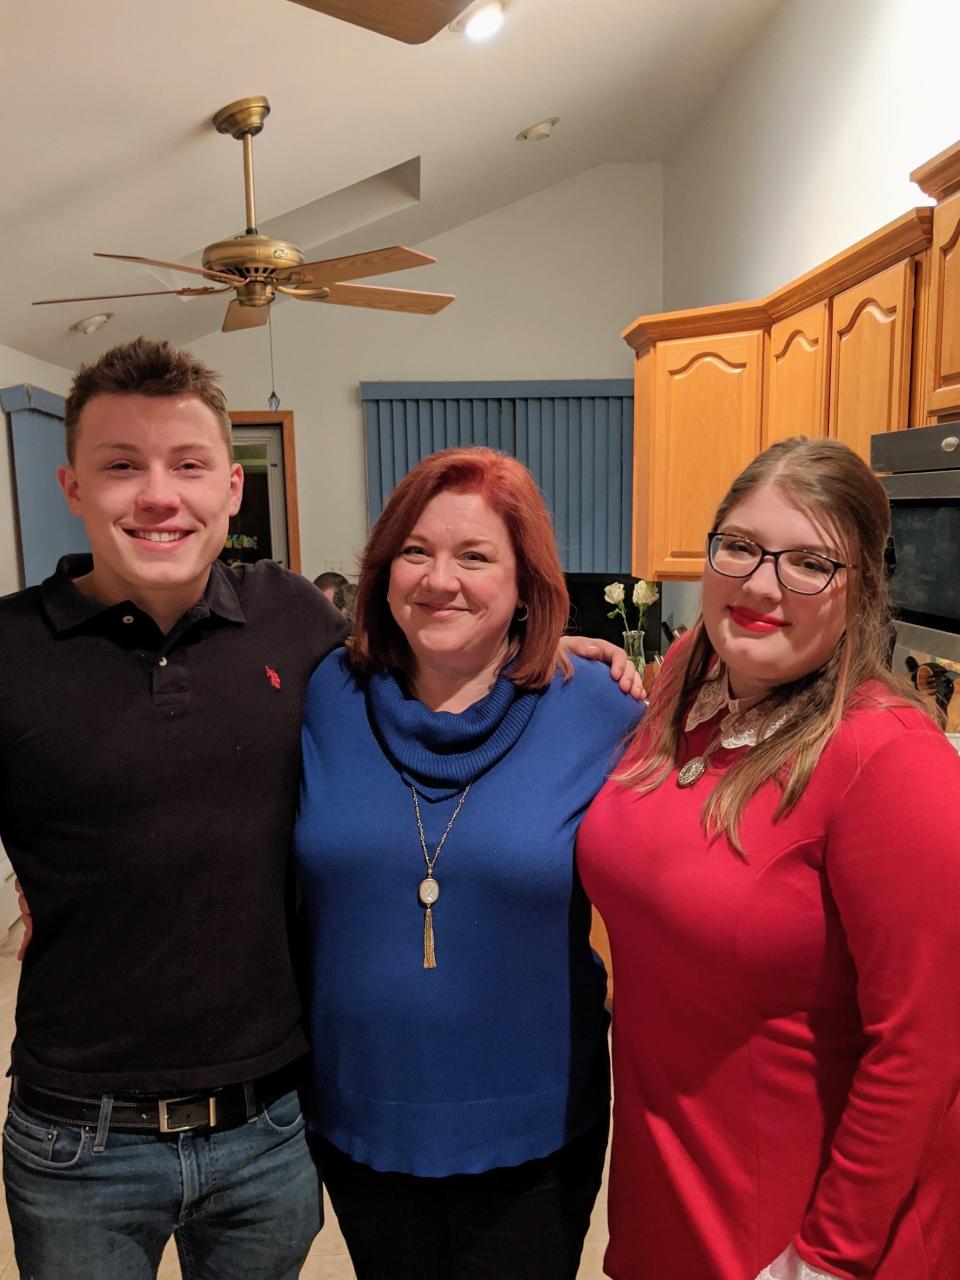 The English family of Maple Shade is coping with the loss of their house and dog from a Christmas Day fire. From the left are Peter, mother Kim and daughter Jessica.